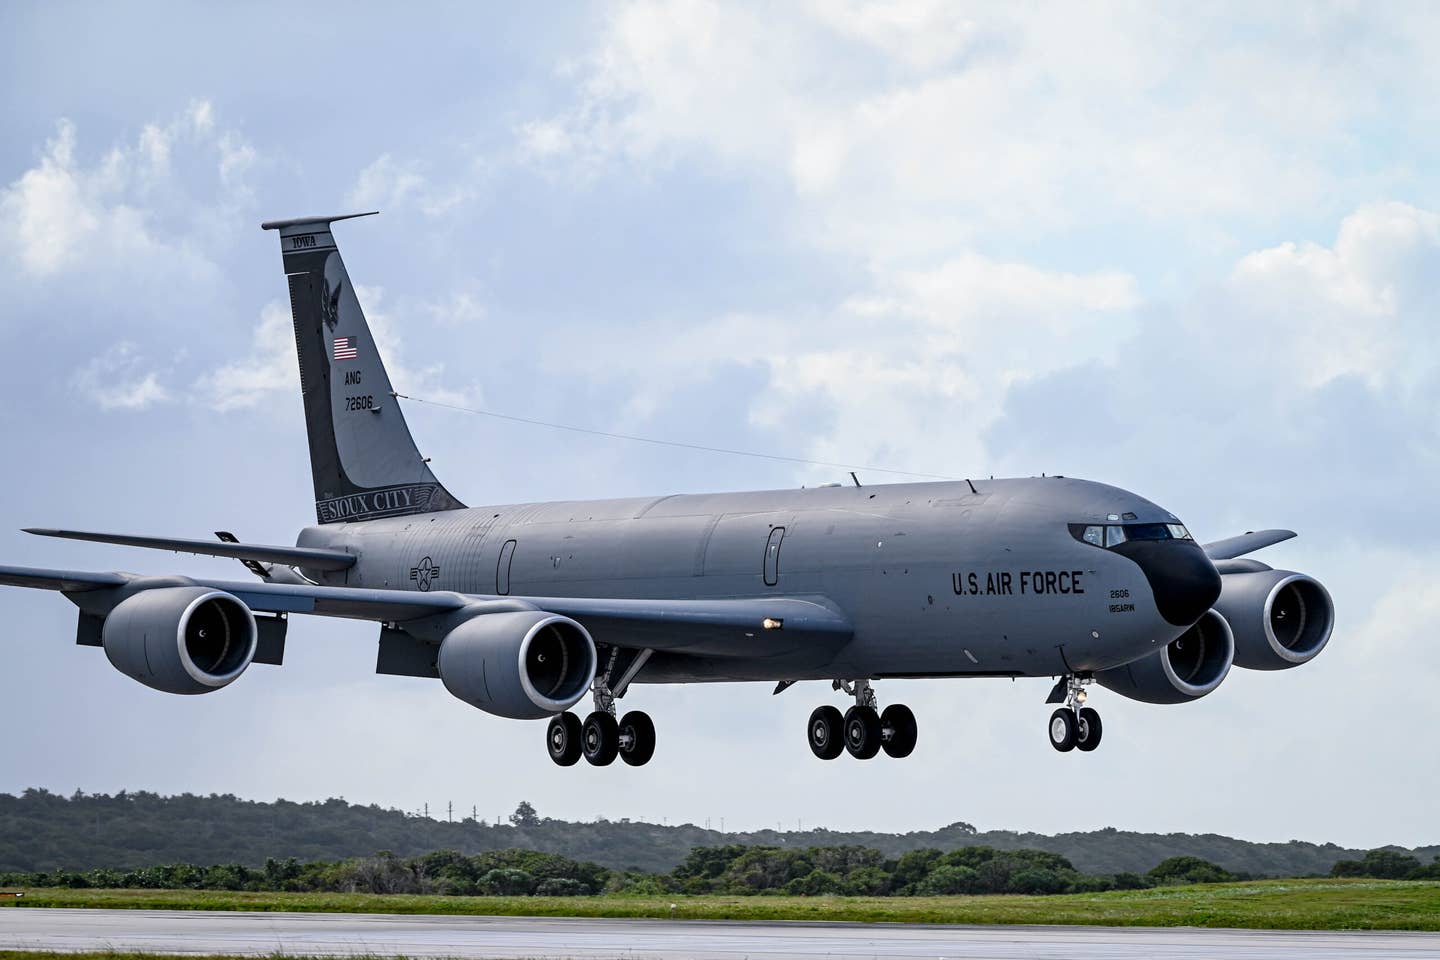 A U.S. Air Force KC-135 Stratotanker assigned to 185th Air Refueling Wing, Iowa Air National Guard lands at Andersen Air Force Base, Guam, February 1, 2021. Currently, the KC-135 plays a key role in providing aerial refueling support to aircraft operating in the Asia Pacific region. <em>U.S. Air Force photo by Airman Kaitlyn Preston</em>